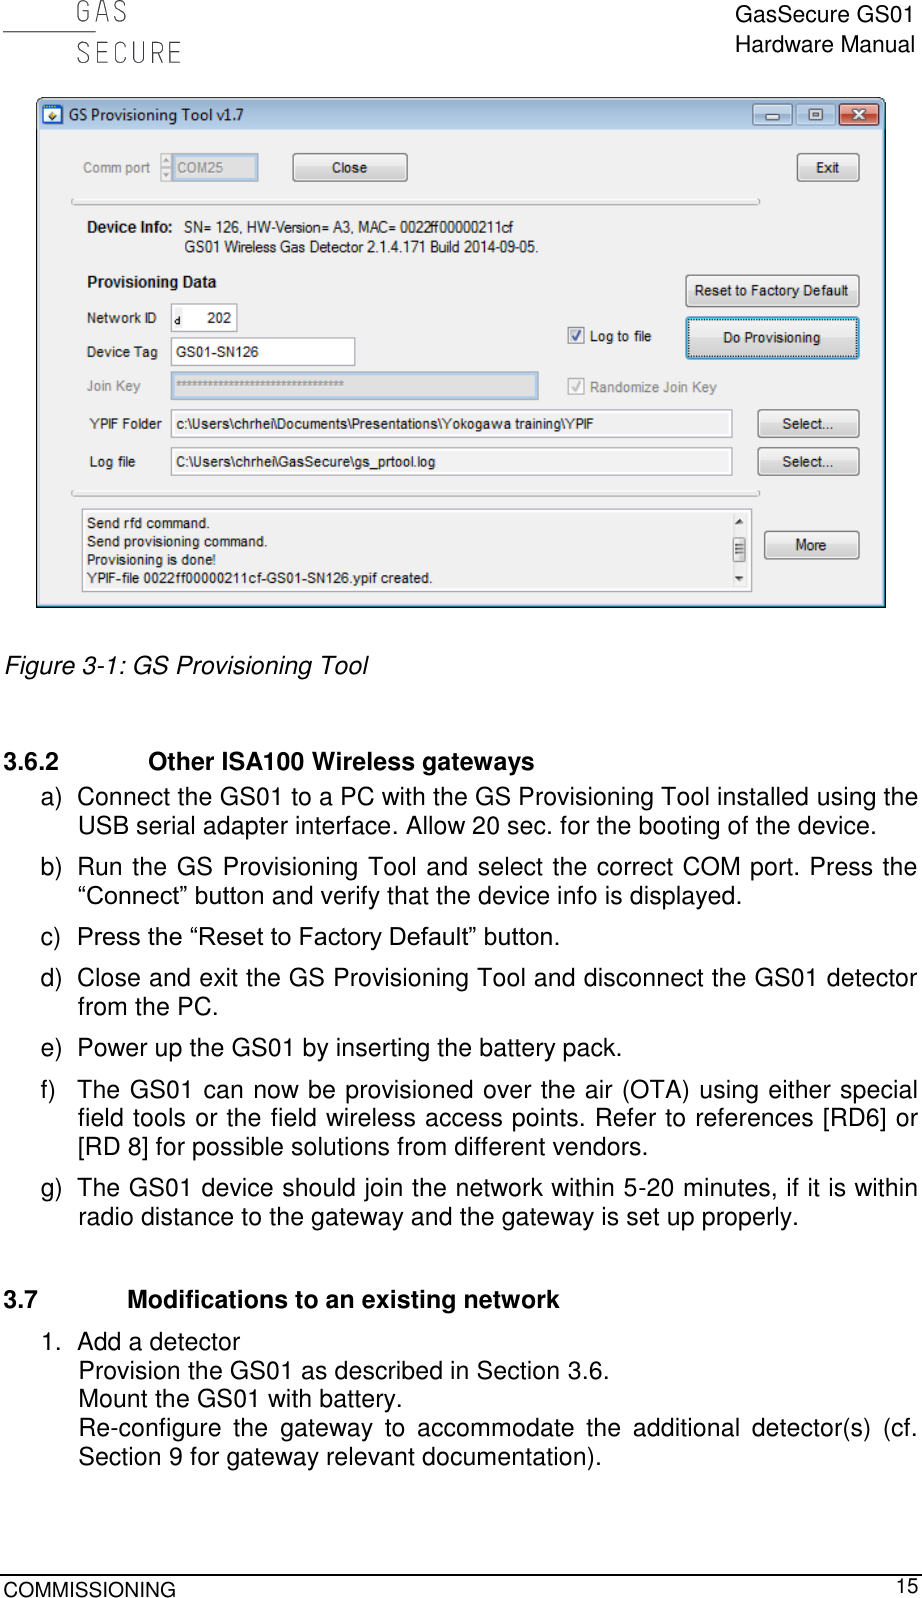  GasSecure GS01 Hardware Manual  COMMISSIONING     15   Figure 3-1: GS Provisioning Tool  3.6.2 Other ISA100 Wireless gateways a)  Connect the GS01 to a PC with the GS Provisioning Tool installed using the USB serial adapter interface. Allow 20 sec. for the booting of the device.  b)  Run the GS Provisioning Tool and select the correct COM port. Press the “Connect” button and verify that the device info is displayed. c)  Press the “Reset to Factory Default” button. d)  Close and exit the GS Provisioning Tool and disconnect the GS01 detector from the PC. e)  Power up the GS01 by inserting the battery pack. f)  The GS01 can now be provisioned over the air (OTA) using either special field tools or the field wireless access points. Refer to references [RD6] or [RD 8] for possible solutions from different vendors. g)  The GS01 device should join the network within 5-20 minutes, if it is within radio distance to the gateway and the gateway is set up properly.  3.7 Modifications to an existing network 1.  Add a detector Provision the GS01 as described in Section 3.6. Mount the GS01 with battery. Re-configure  the  gateway  to  accommodate  the  additional  detector(s)  (cf. Section 9 for gateway relevant documentation).  